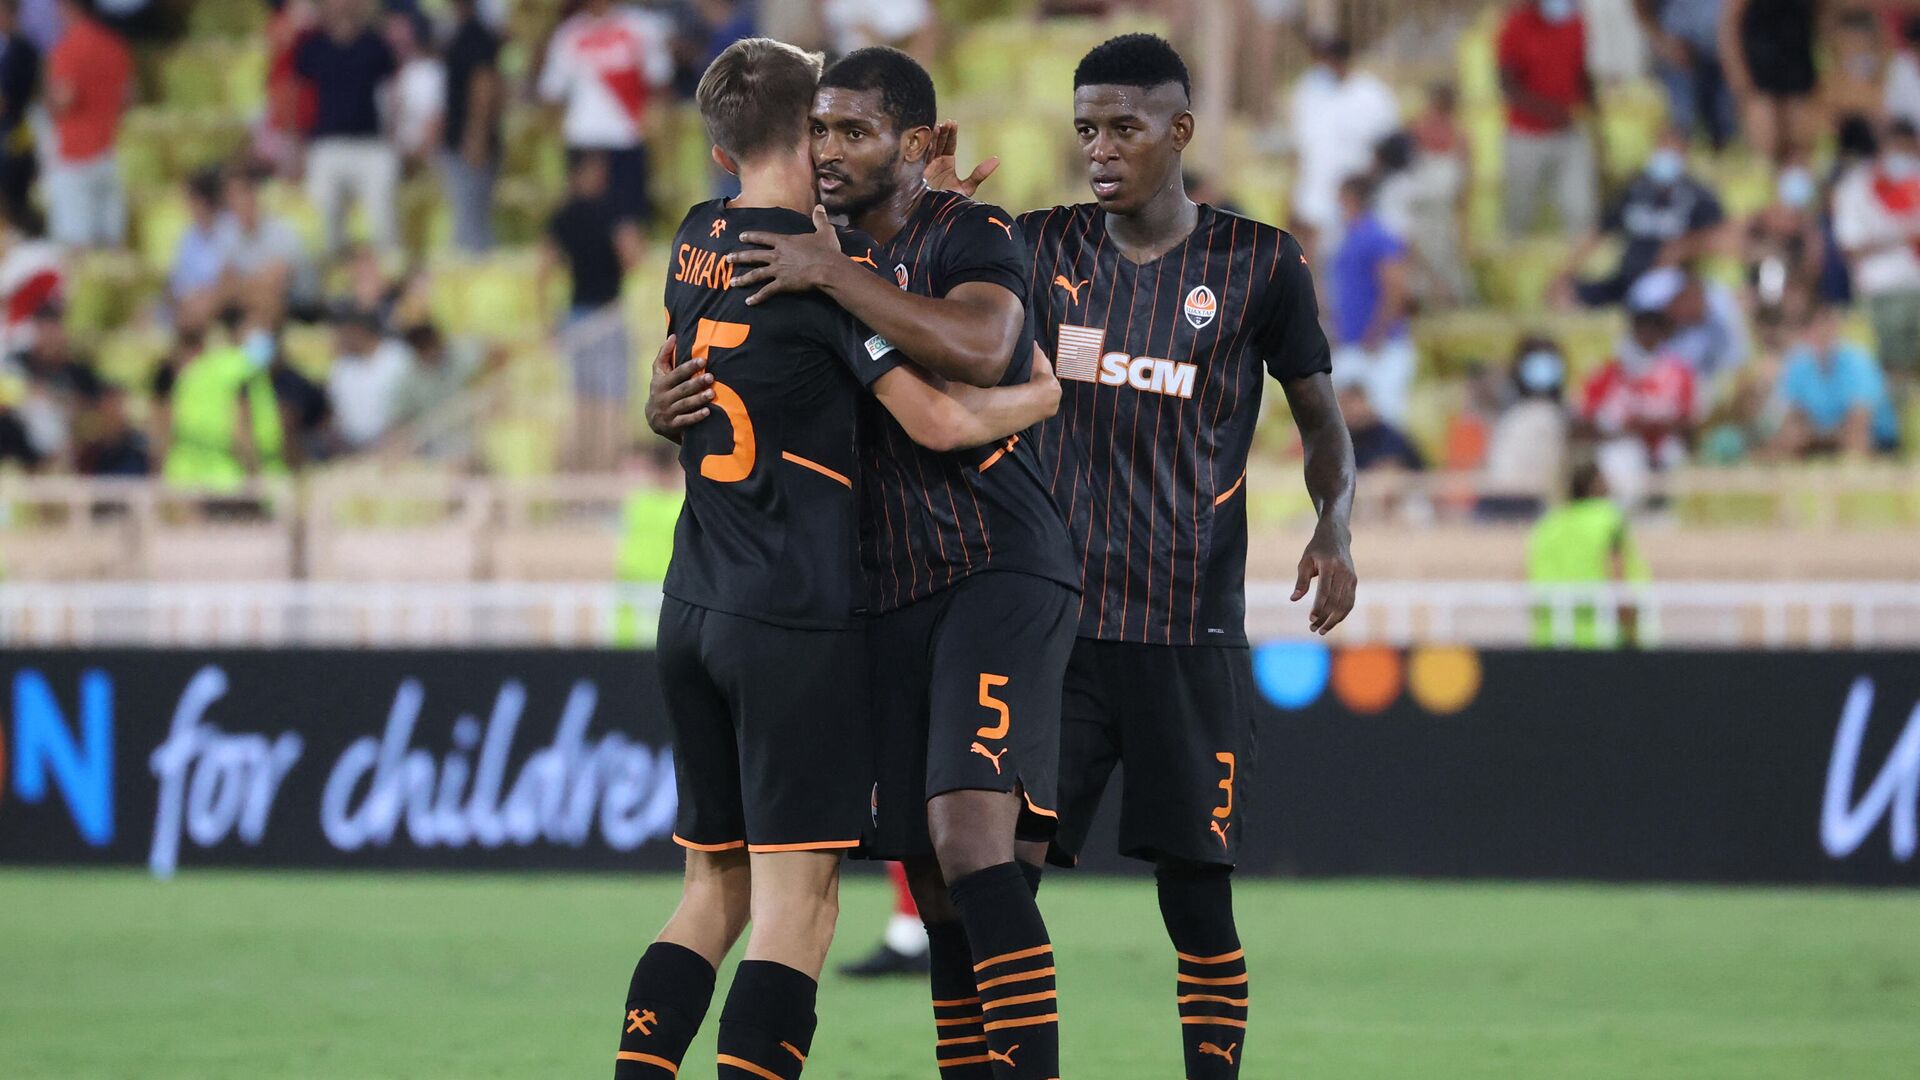 Shakhtar Donetsk's players react at the end of their UEFA Champions League third preliminary round football match between AS Monaco and FC Chakhtar Donetsk at Louis II stadium in Monaco, on August 17, 2021. (Photo by Valery HACHE / AFP) - РИА Новости, 1920, 26.08.2021